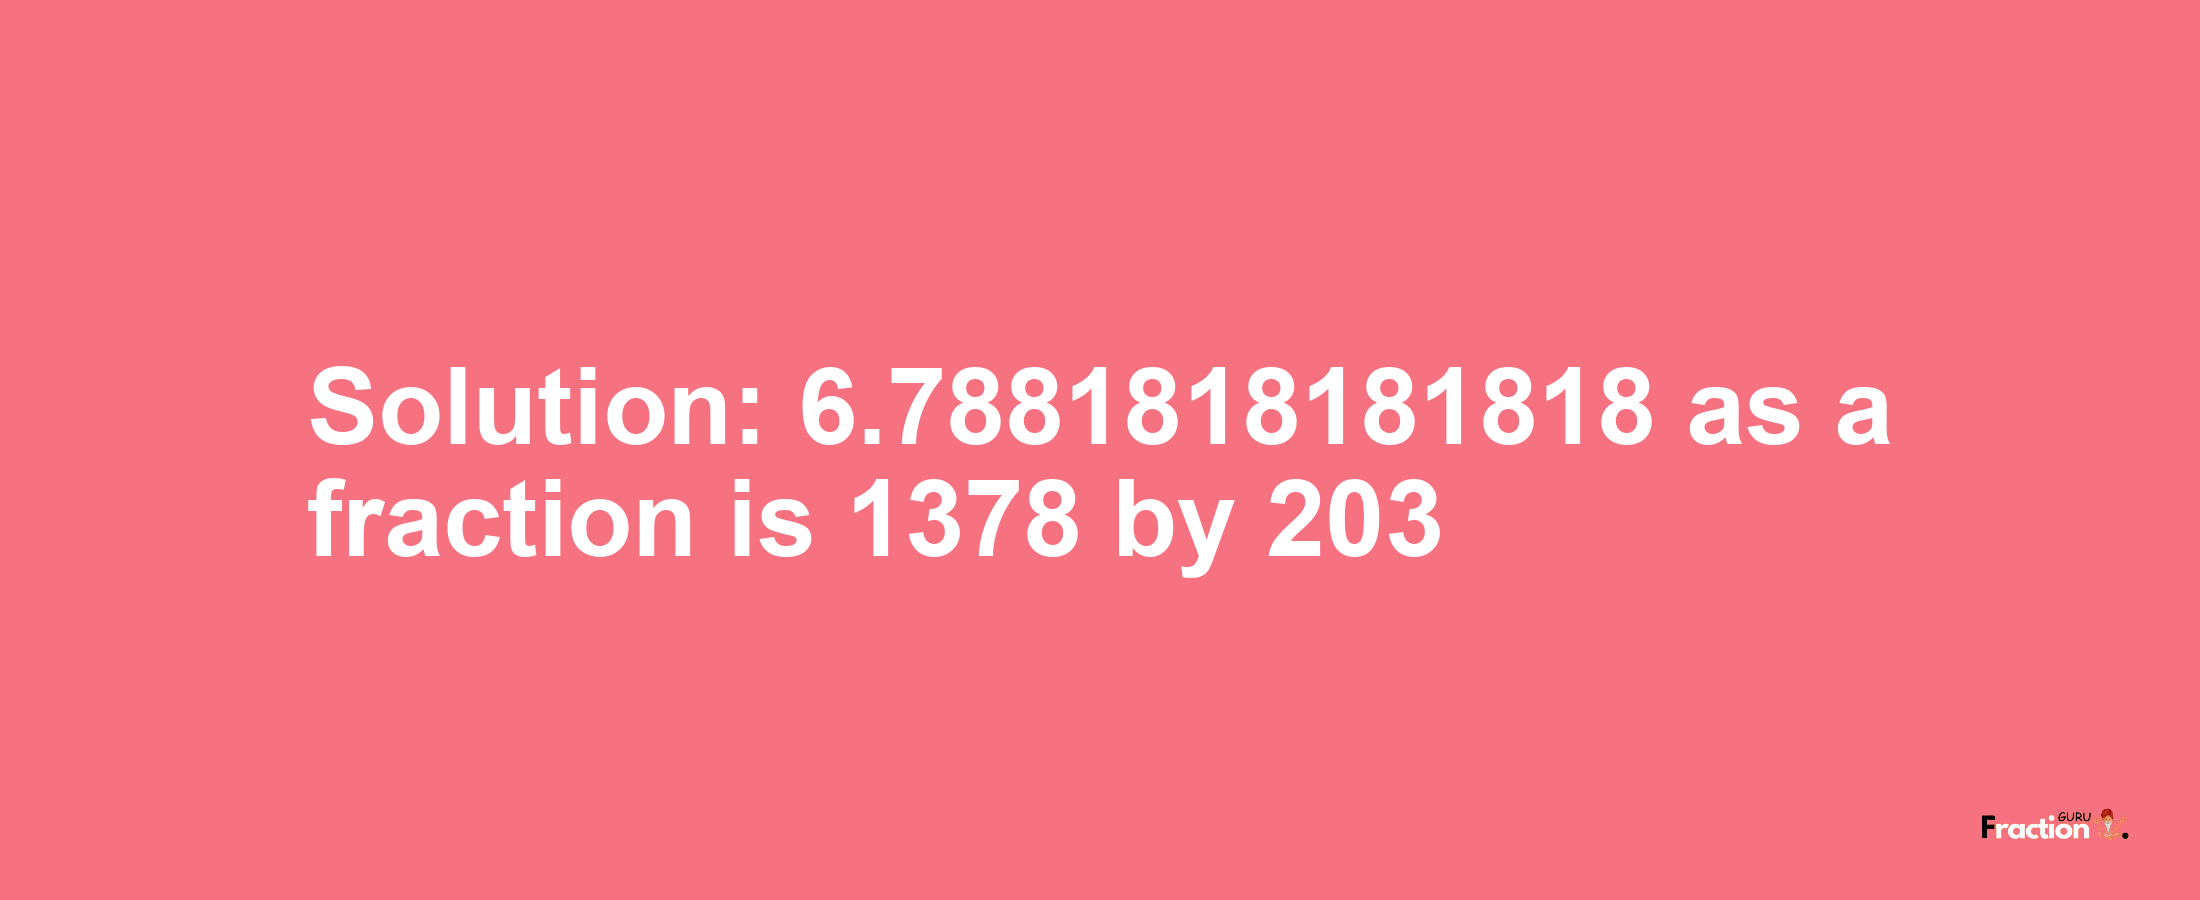 Solution:6.7881818181818 as a fraction is 1378/203